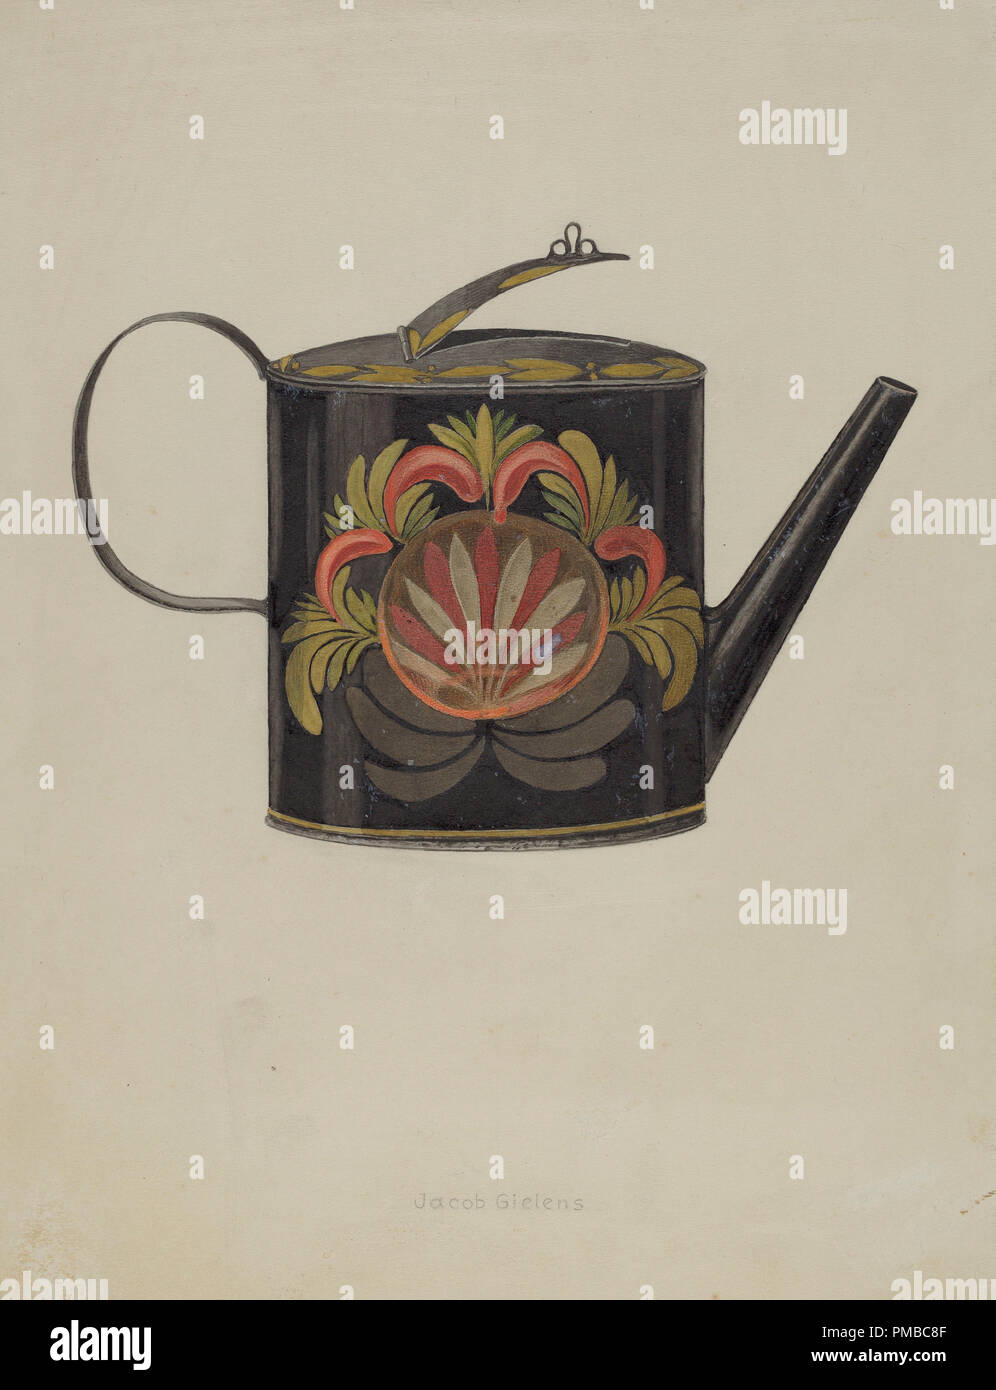 Toleware Tin Coffee Pot. Dated: c. 1938. Dimensions: overall: 35.7 x 28.2 cm (14 1/16 x 11 1/8 in.)  Original IAD Object: 9' wide; 6 5/8' high. Medium: watercolor, graphite, and gouache on paperboard. Museum: National Gallery of Art, Washington DC. Author: Jacob Gielens. Stock Photo